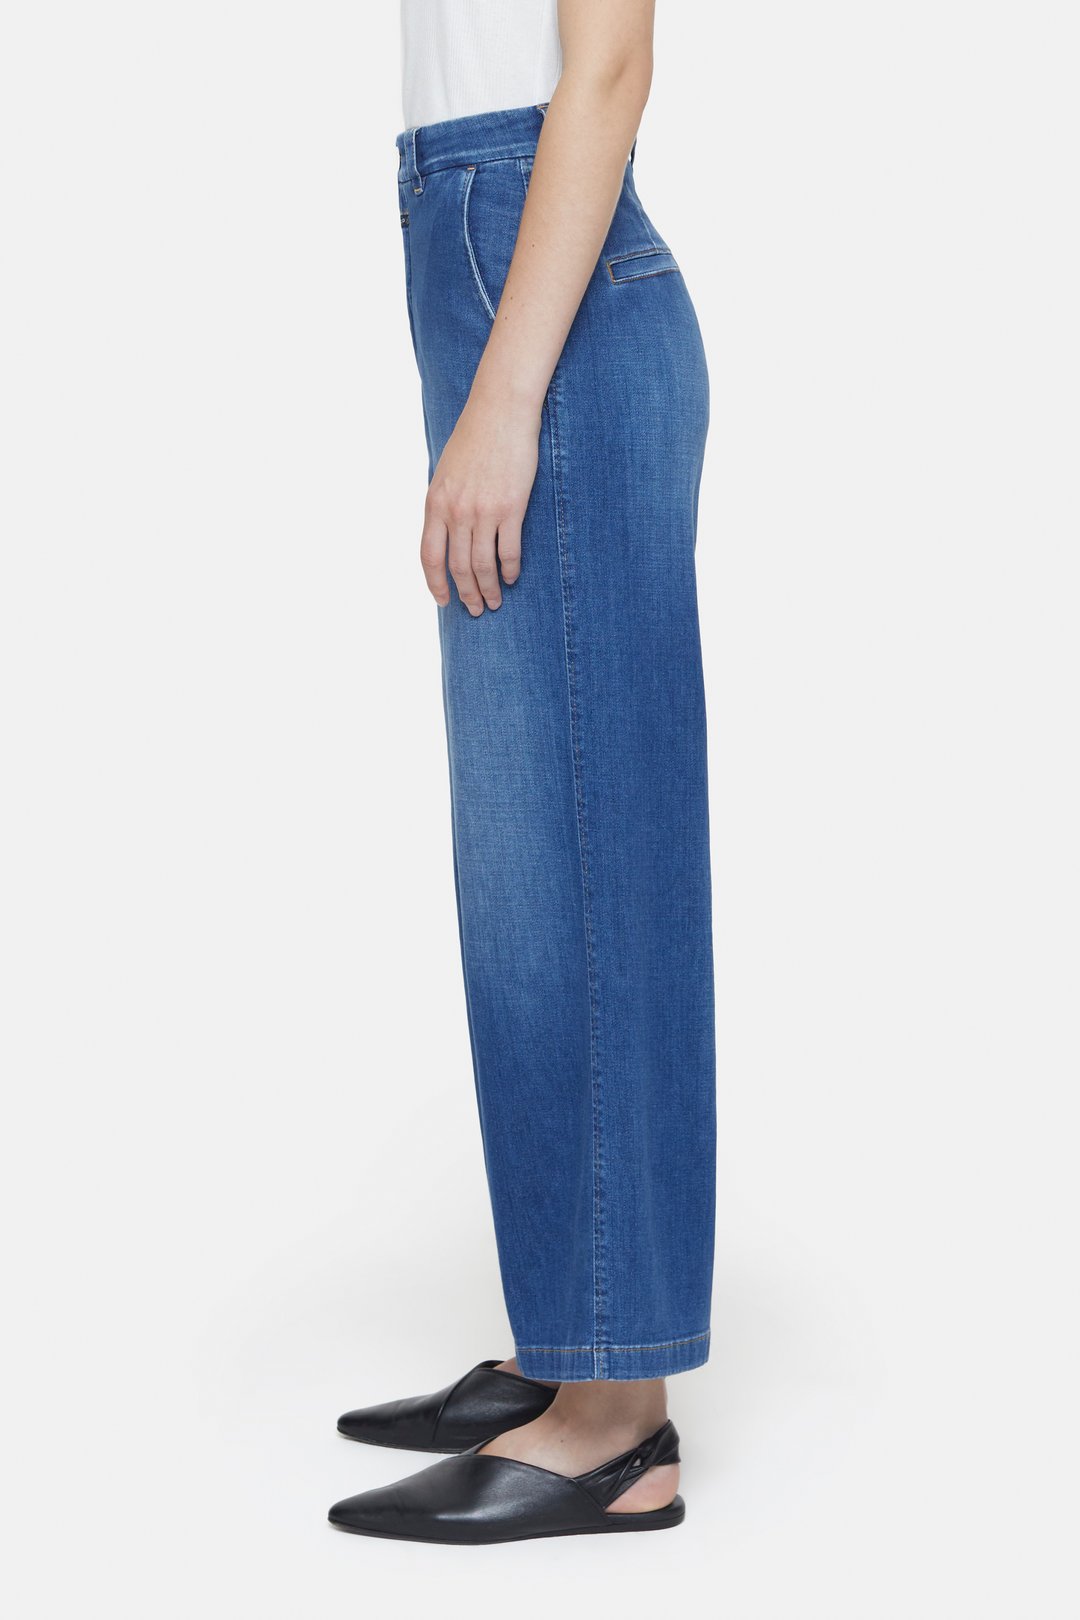 BARTON WIDE - STYLE | JEANS CLOSED NAME